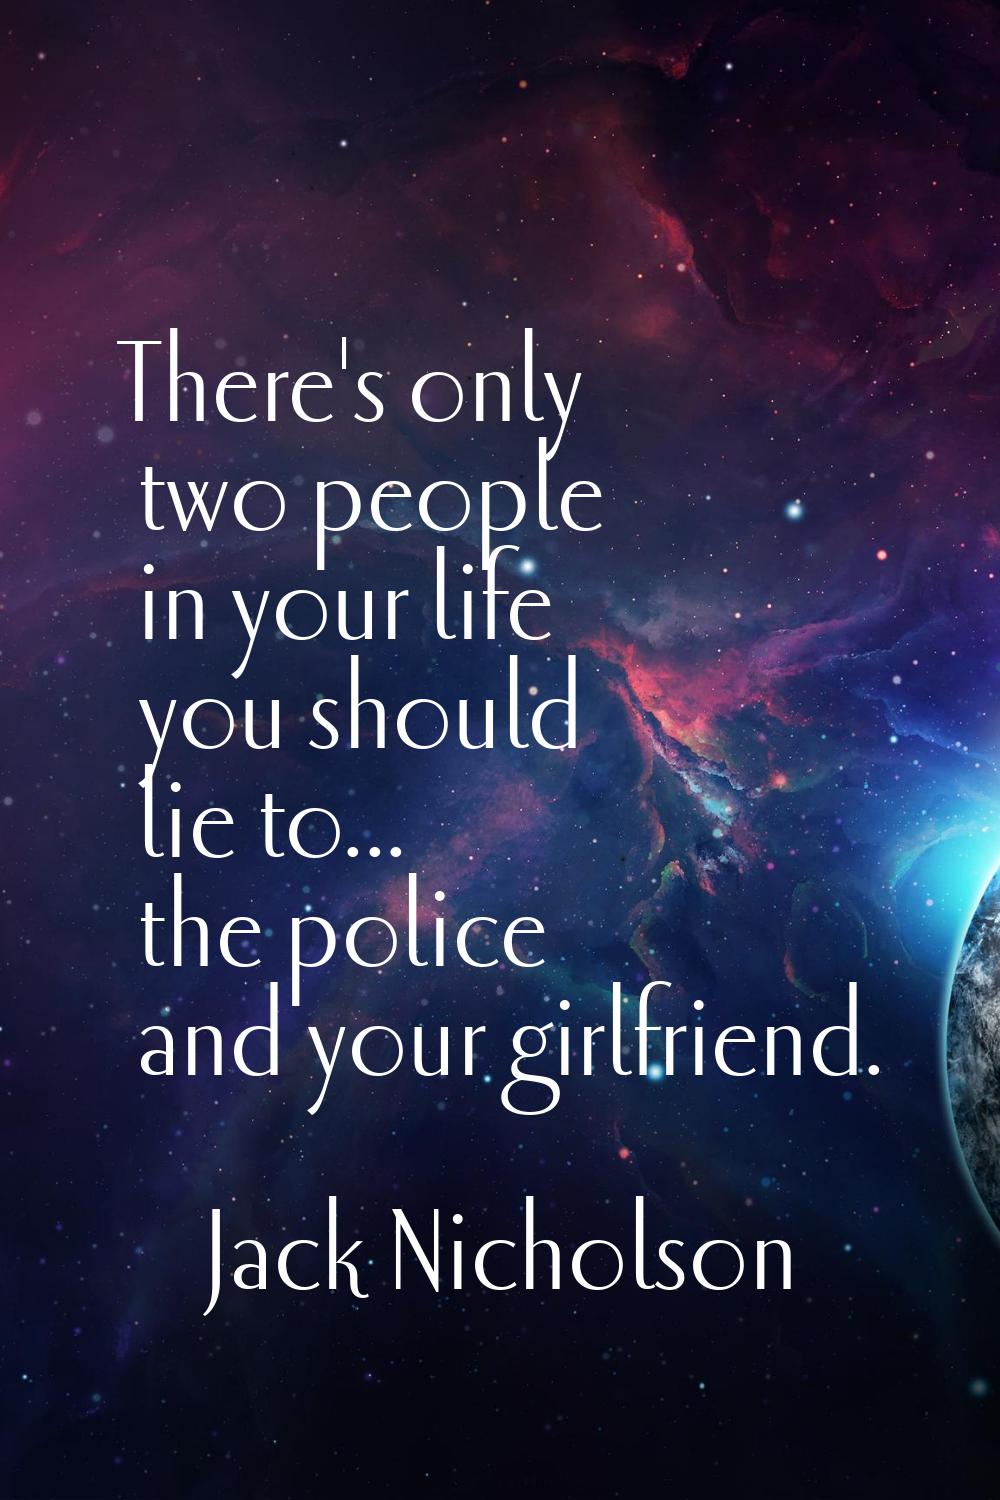 There's only two people in your life you should lie to... the police and your girlfriend.